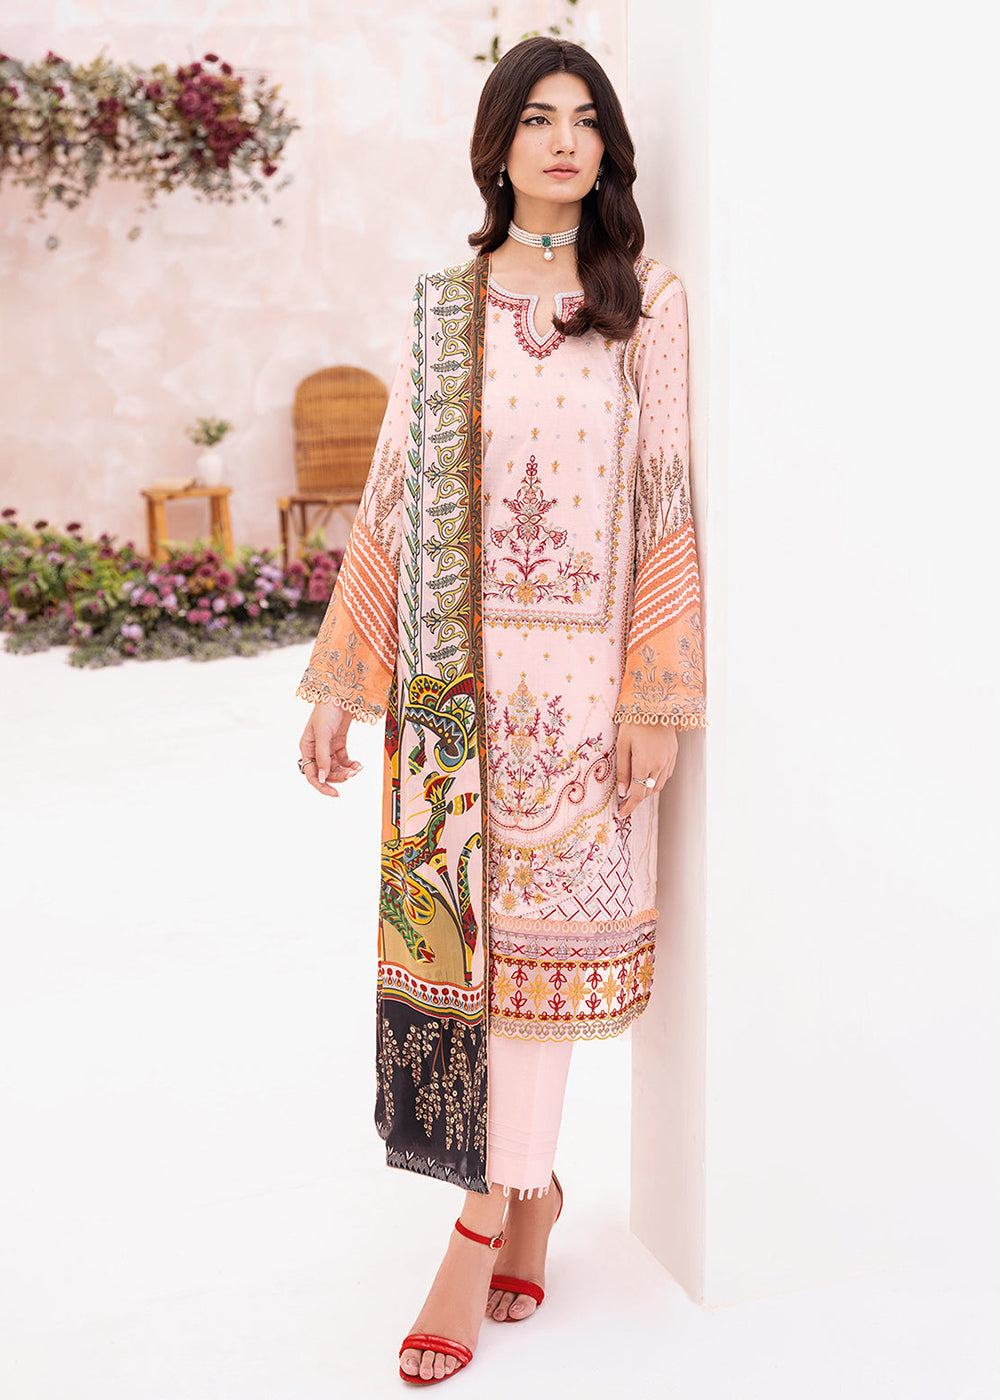 Buy Now Pink Pakistani Salwar Suit - Ramsha Mashaal Collection Vol 7 - #L-712 Online in USA, UK, Canada & Worldwide at Empress Clothing.